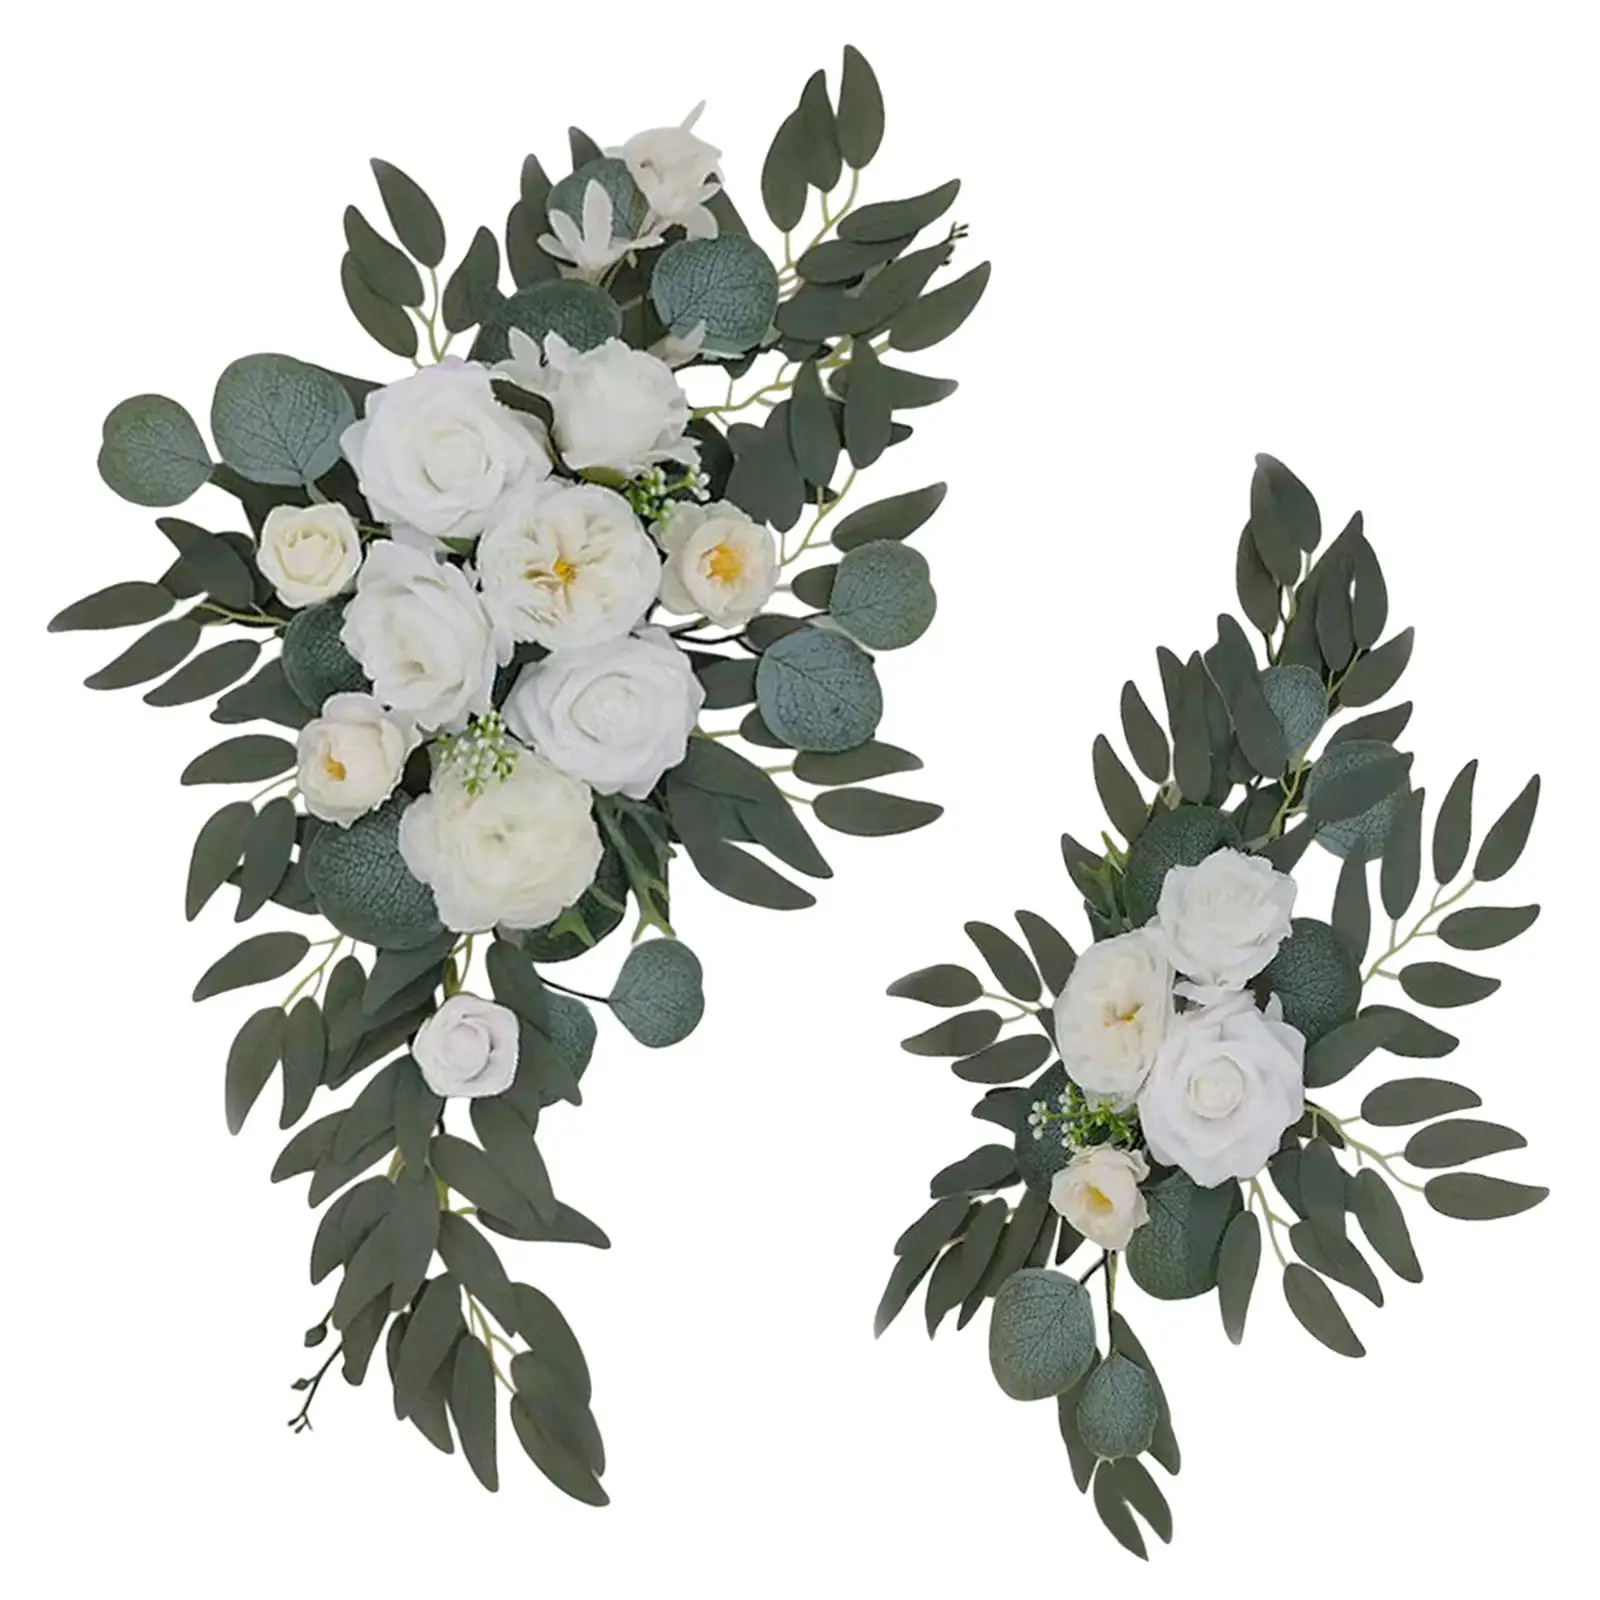 2 Pieces Silk Wedding Arch White Flower Flowers Ceremony Signs for Reception Ceremony Welcome Sign Arrangement Decoration